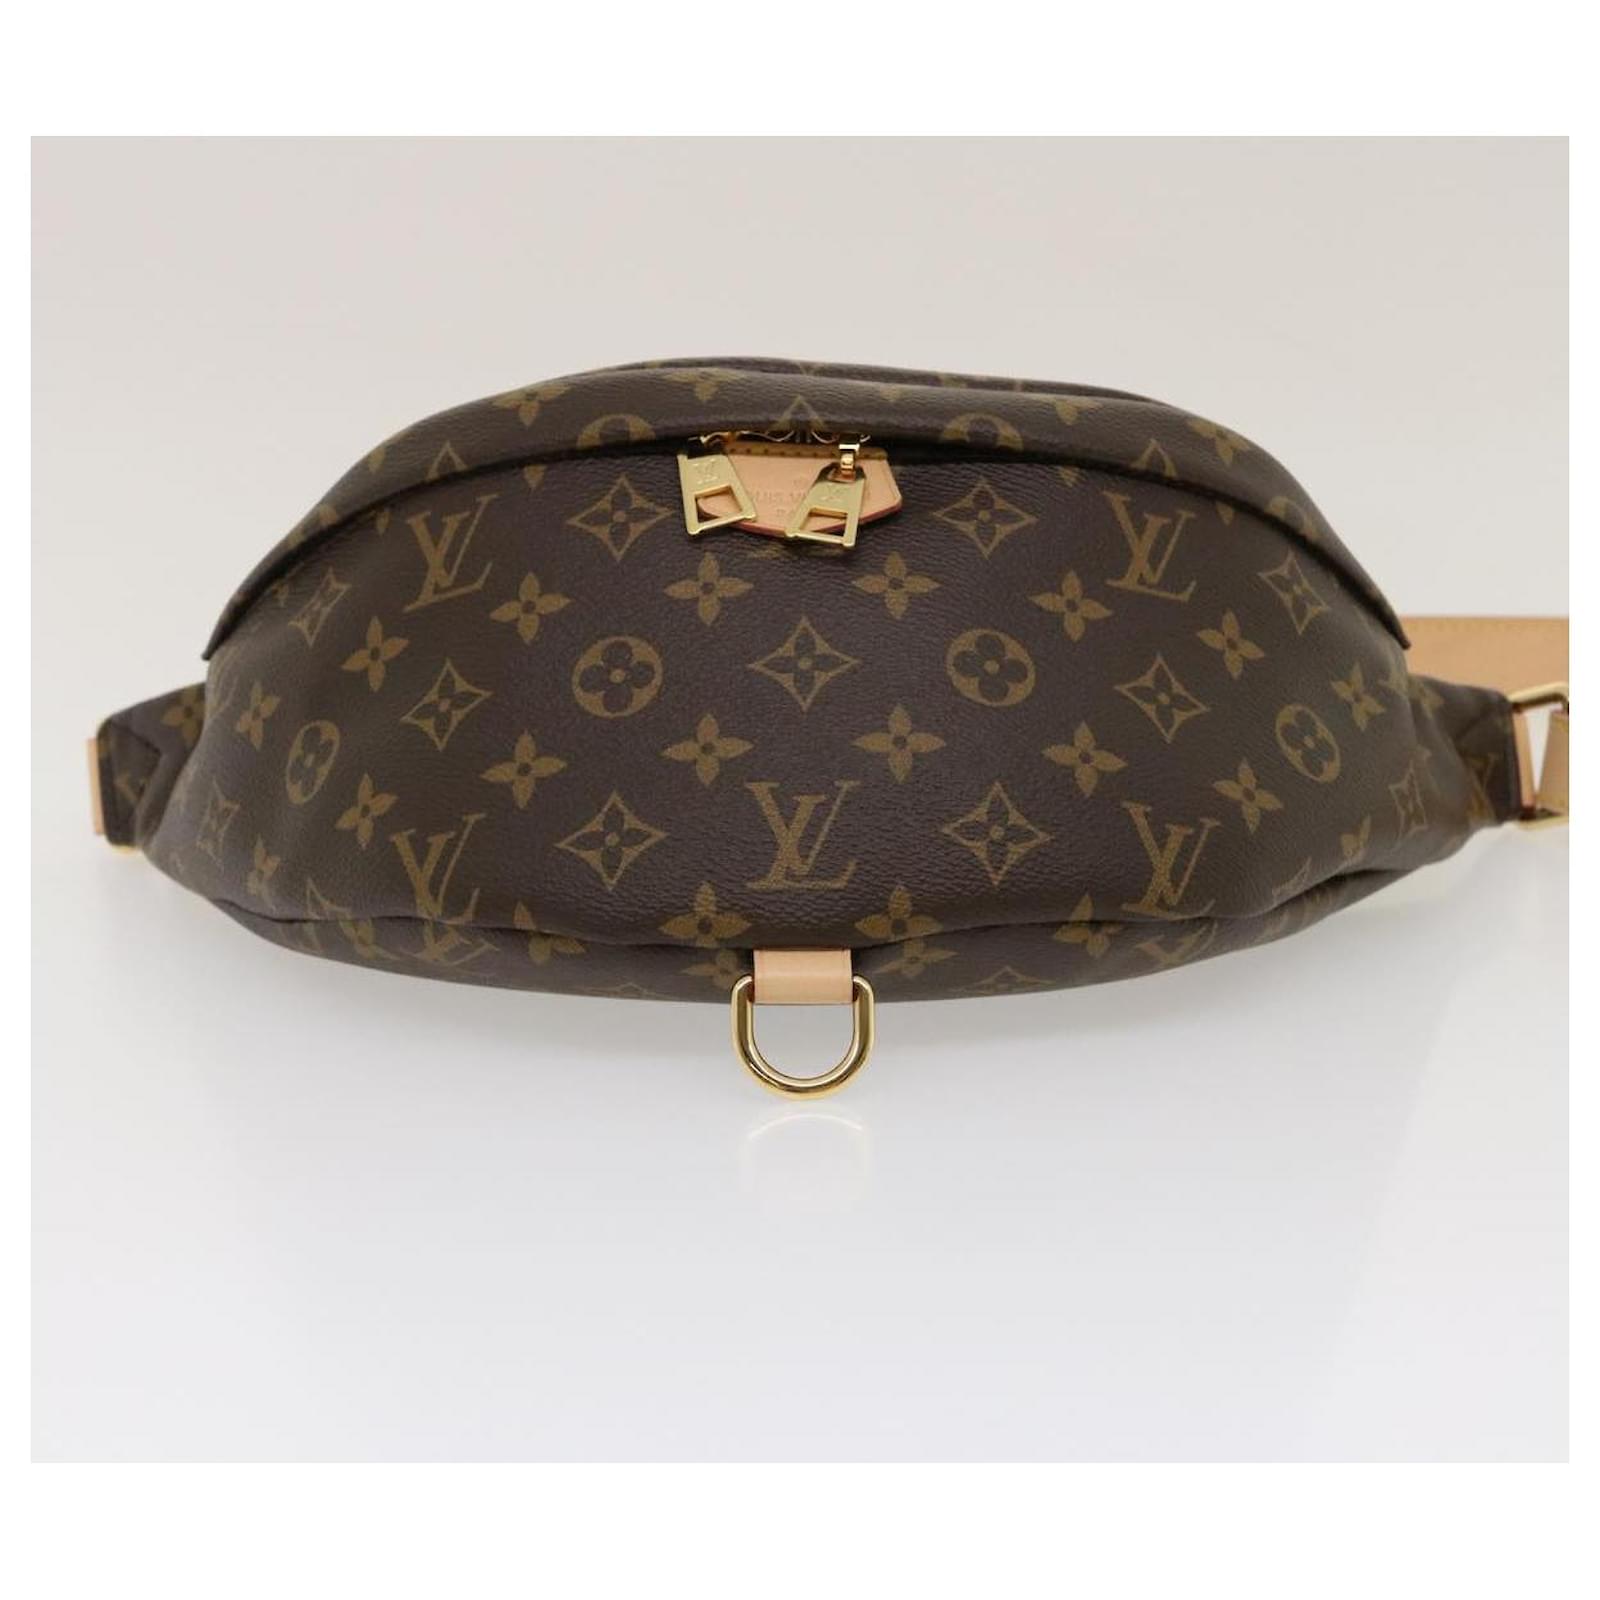 Brand Bag Girl   Licensed  Authentic Luxury Consignment brandbaggirl   Instagram photos and videos